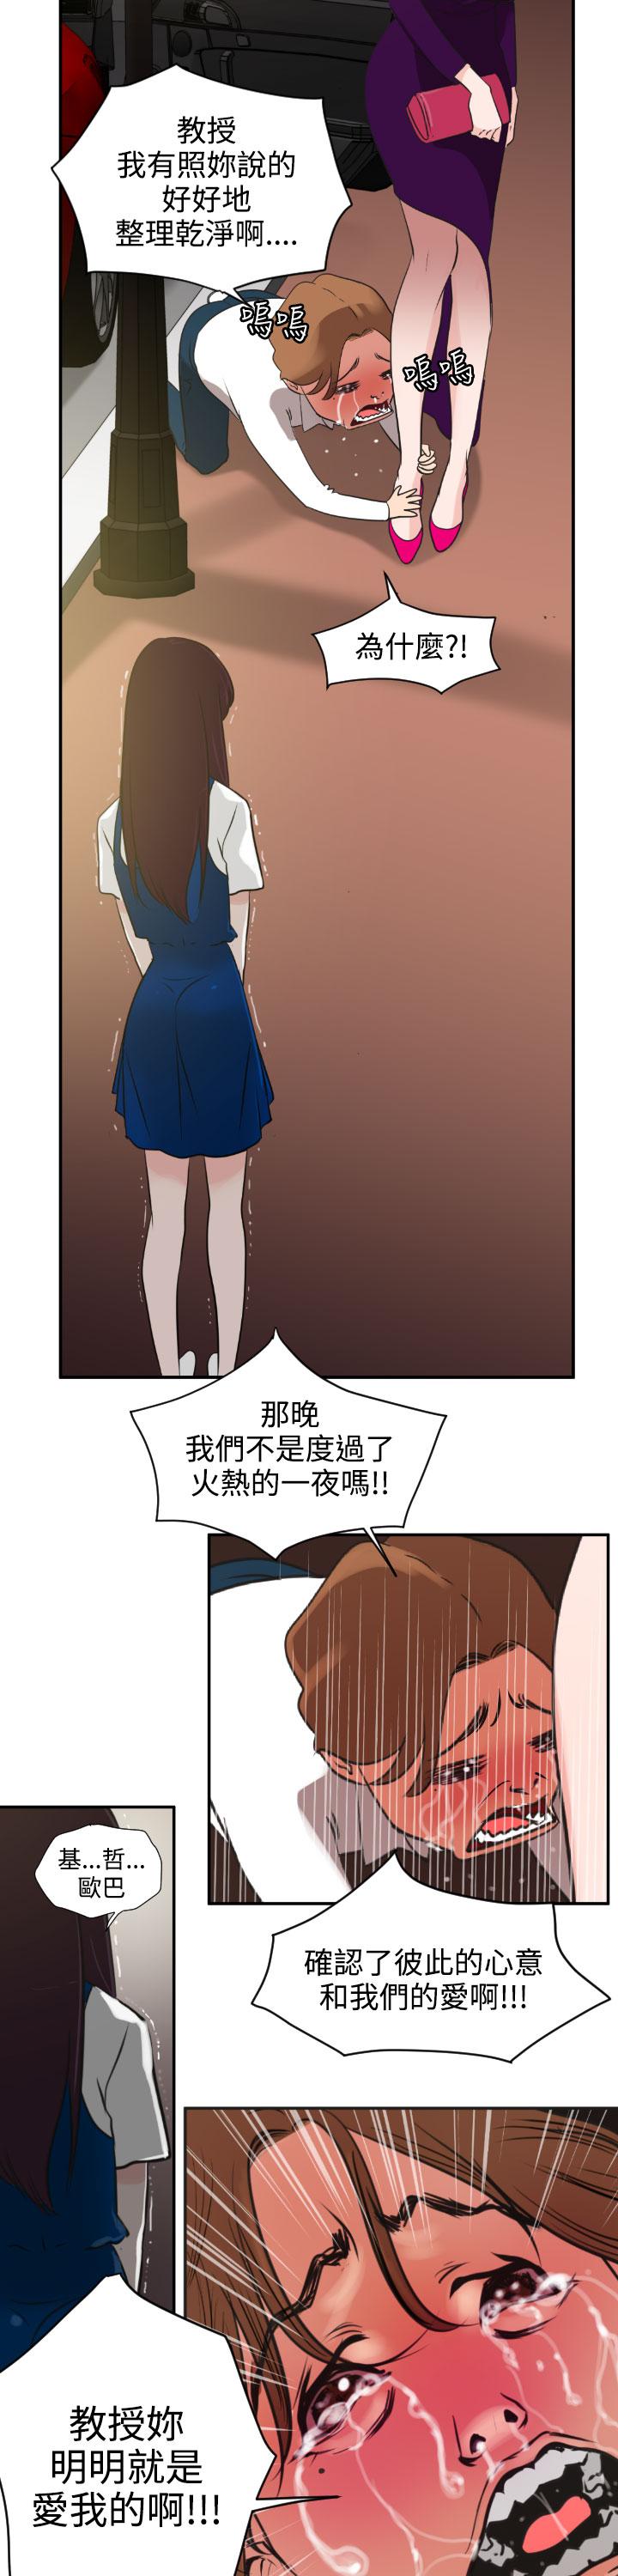 Desire King (慾求王) Ch.1-12 (chinese) 75